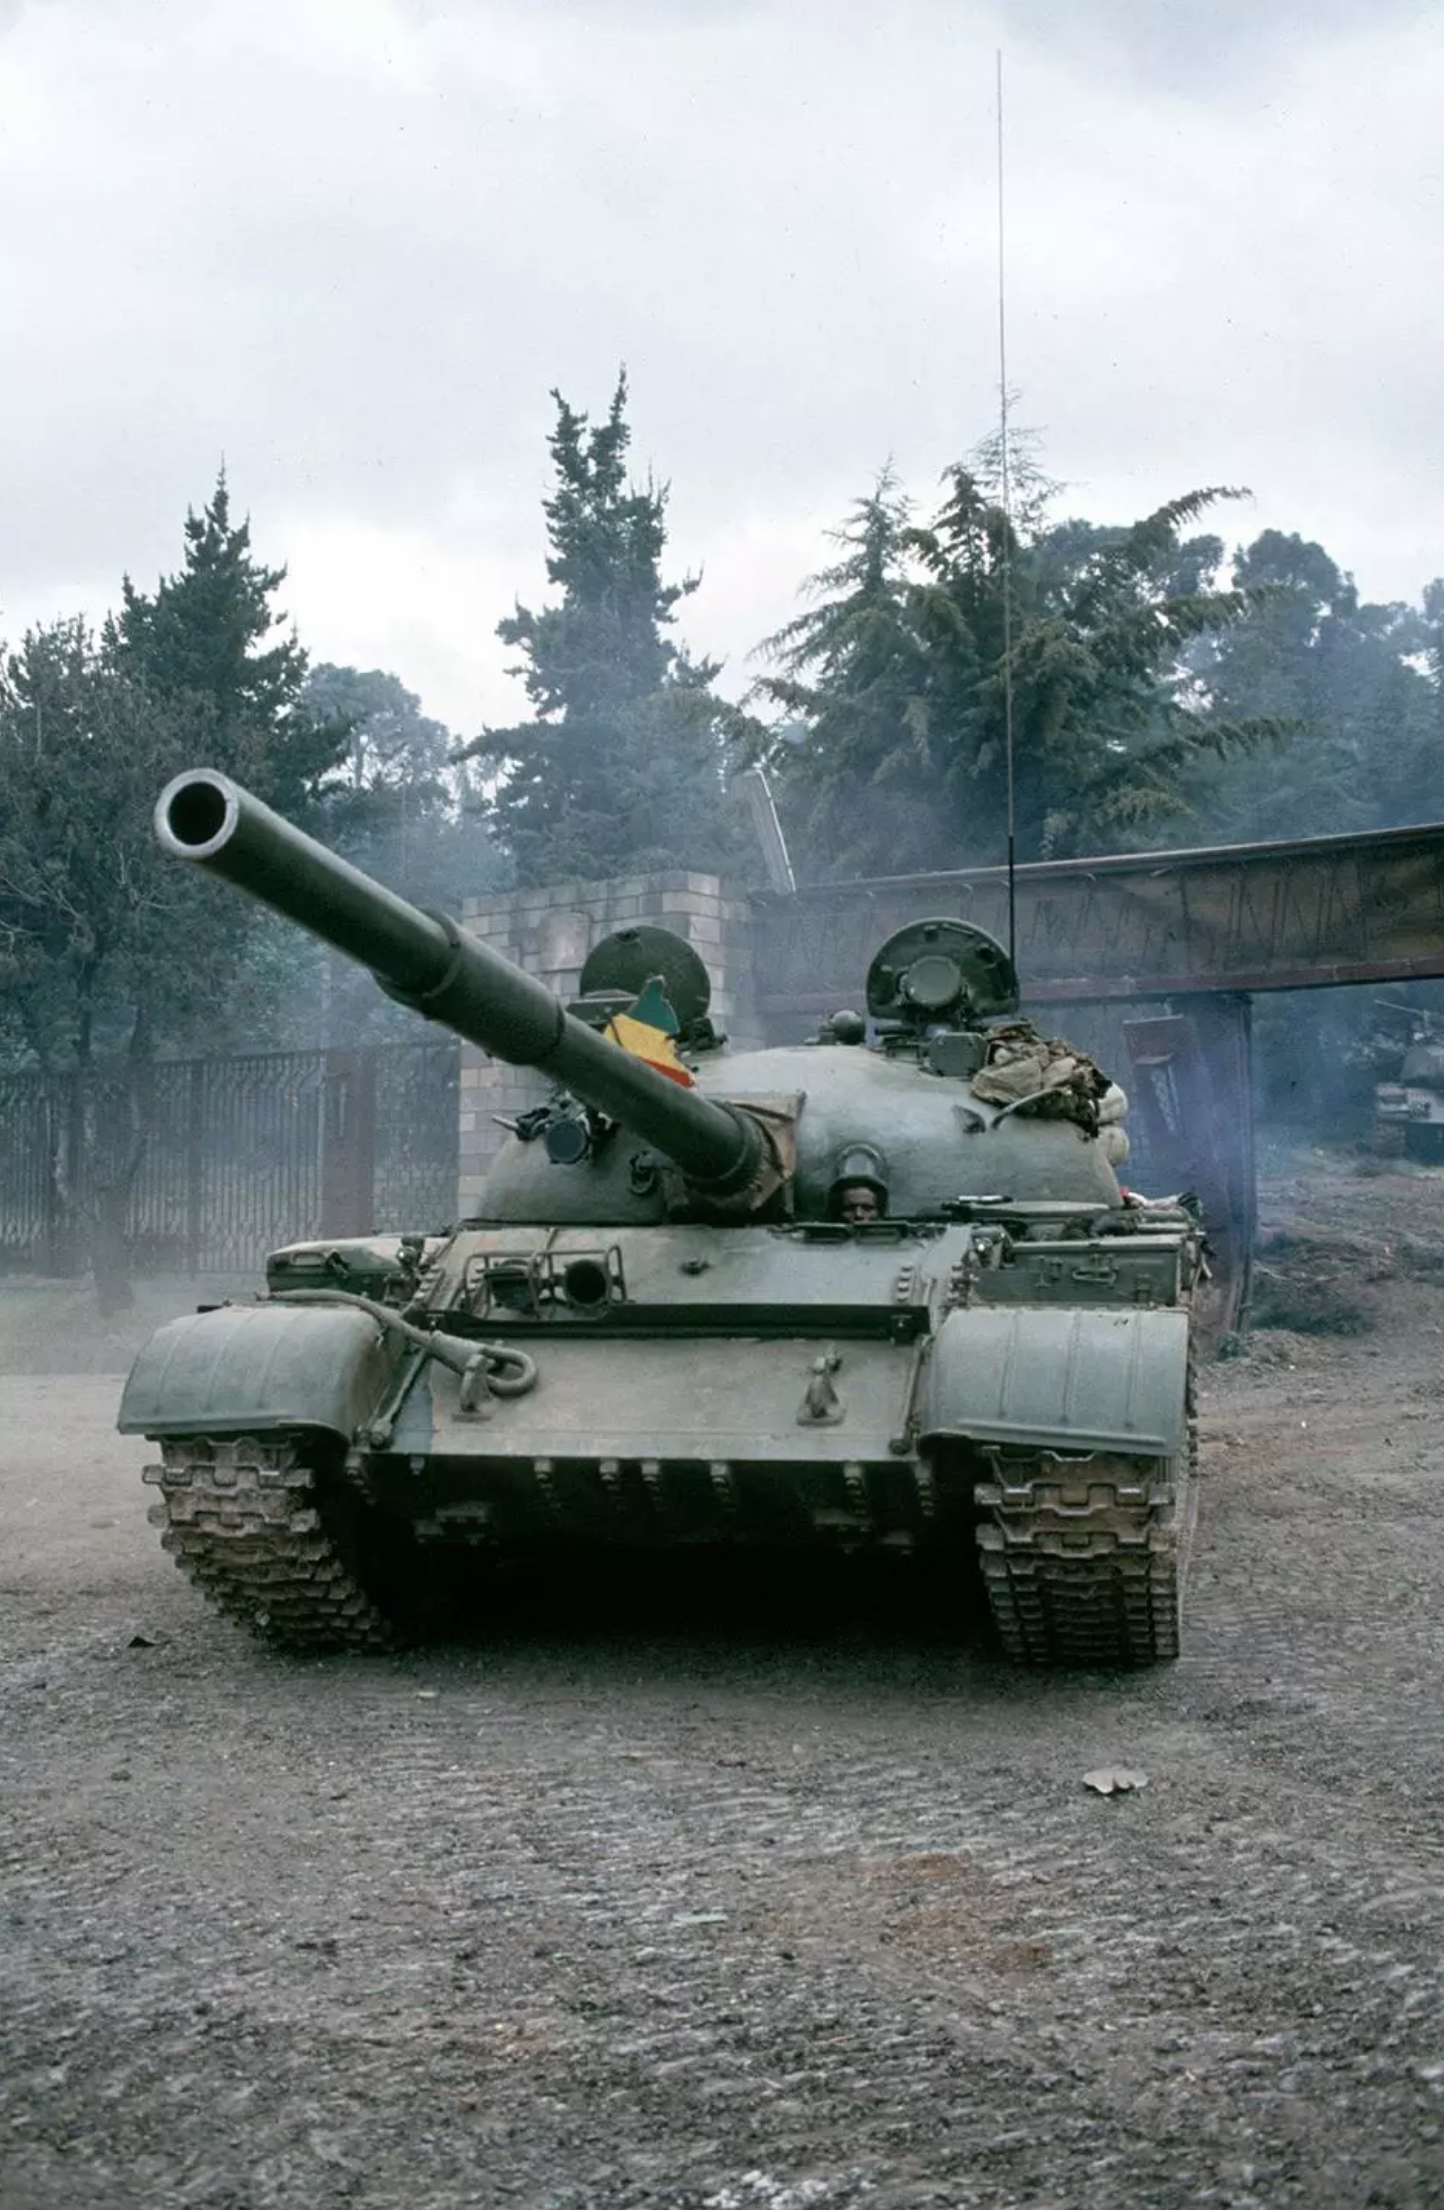 A Soviet tank used in the overthrow of Ethiopia's Mengistu Haile Mariam government in 1991. Image by Francoise de Mulder. Ethiopia, 2018. 